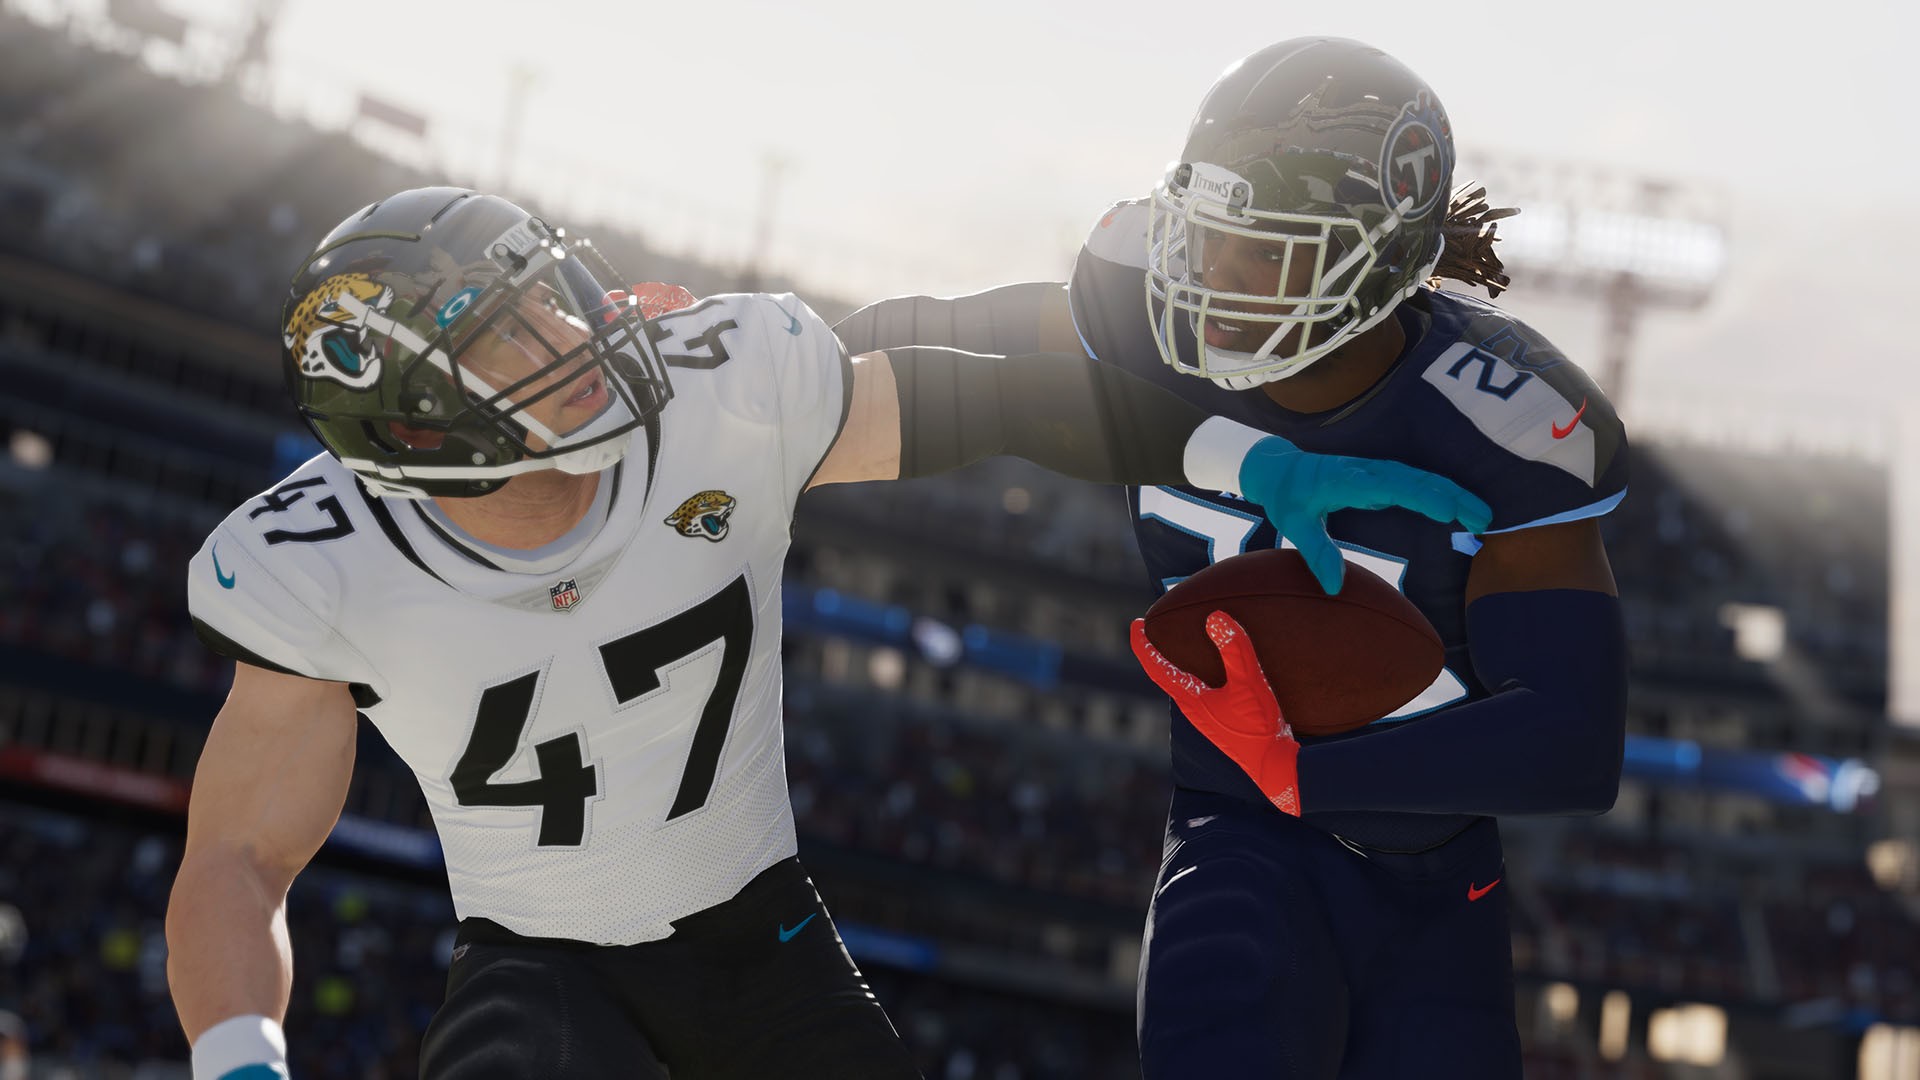 Madden NFL 22 Free-to-Play Trial Starts September 9